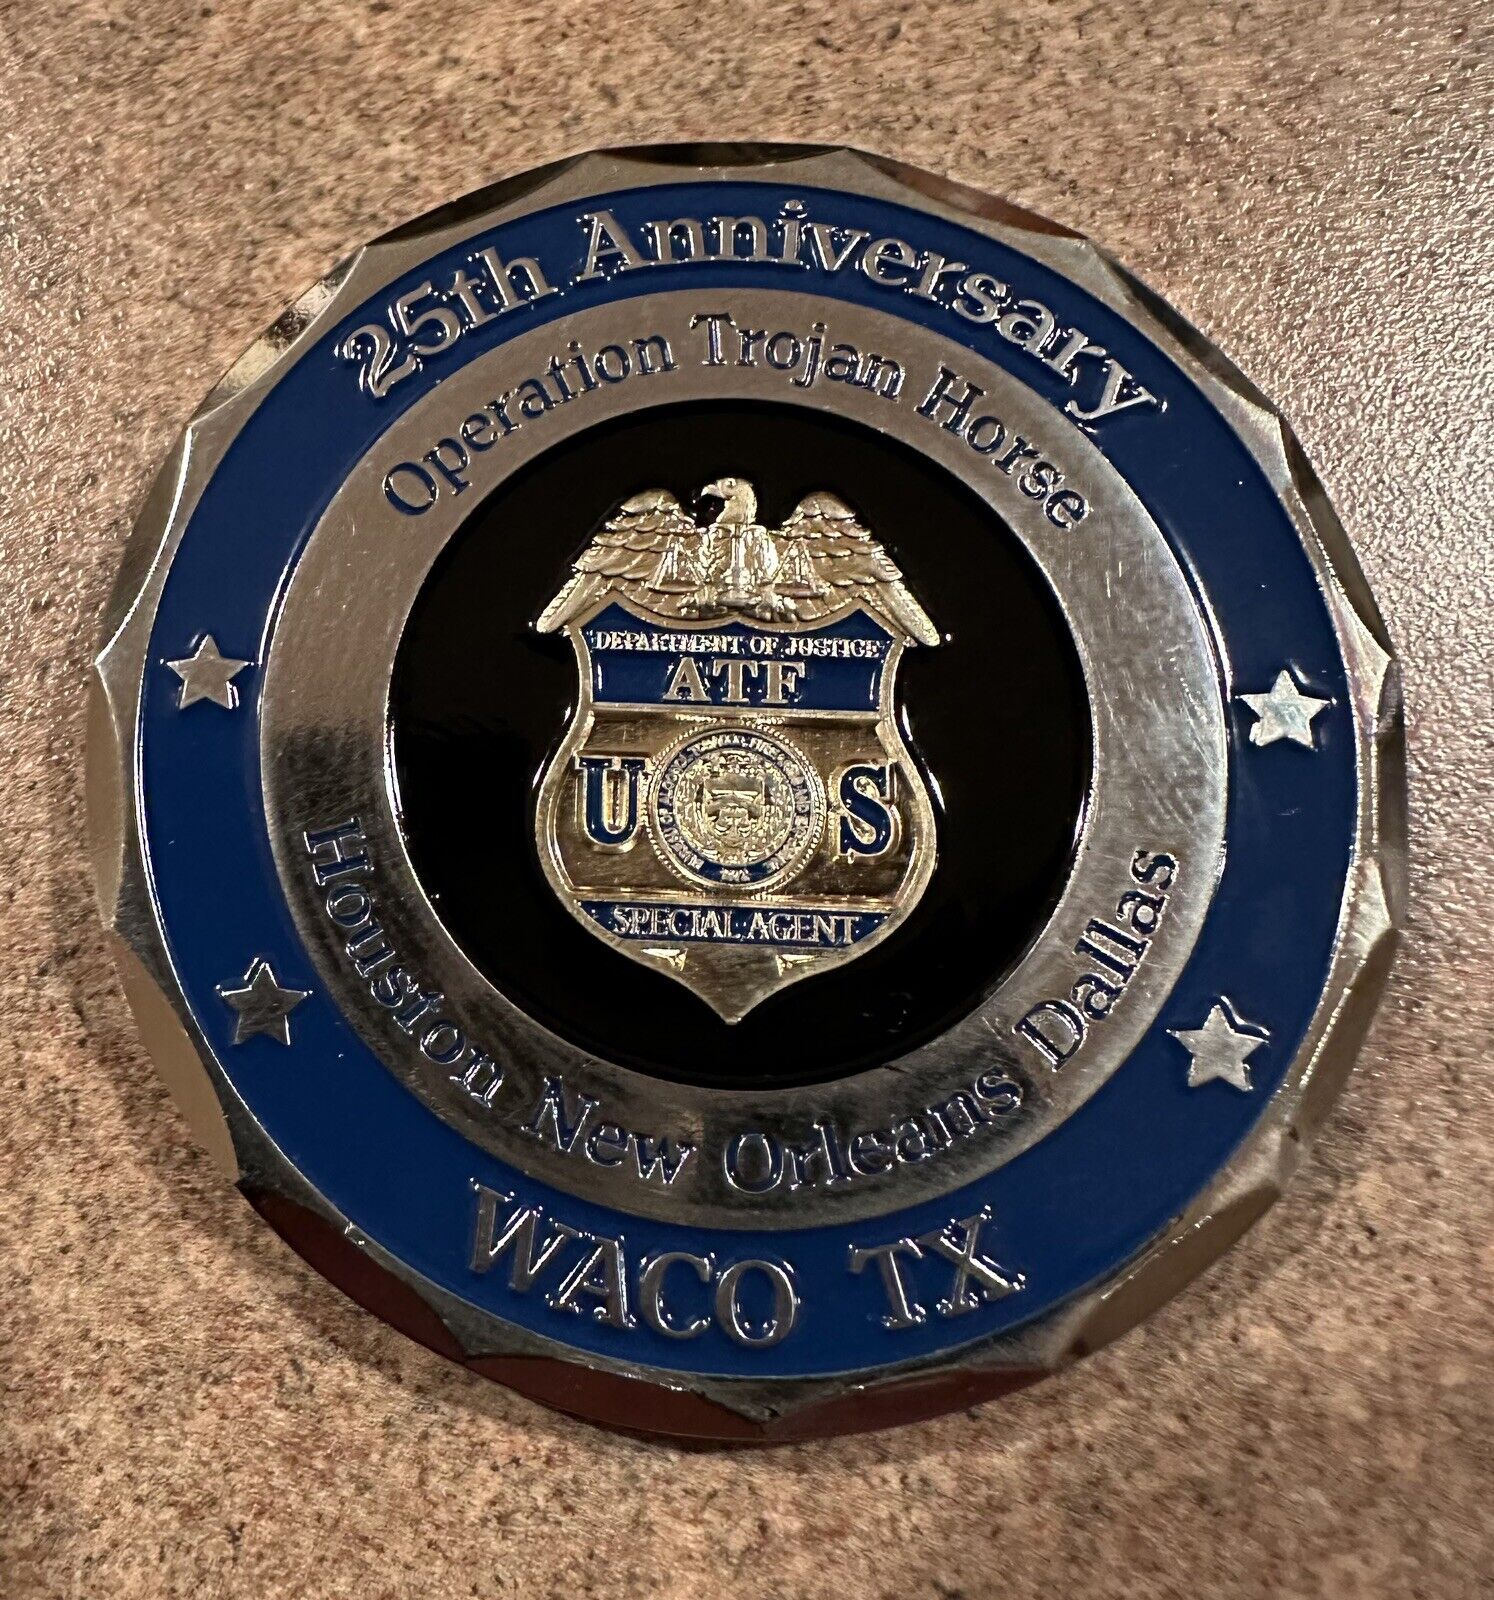 ATF Alcohol Tobacco & Firearms Waco TX  25th Anniversary Challenge Coin